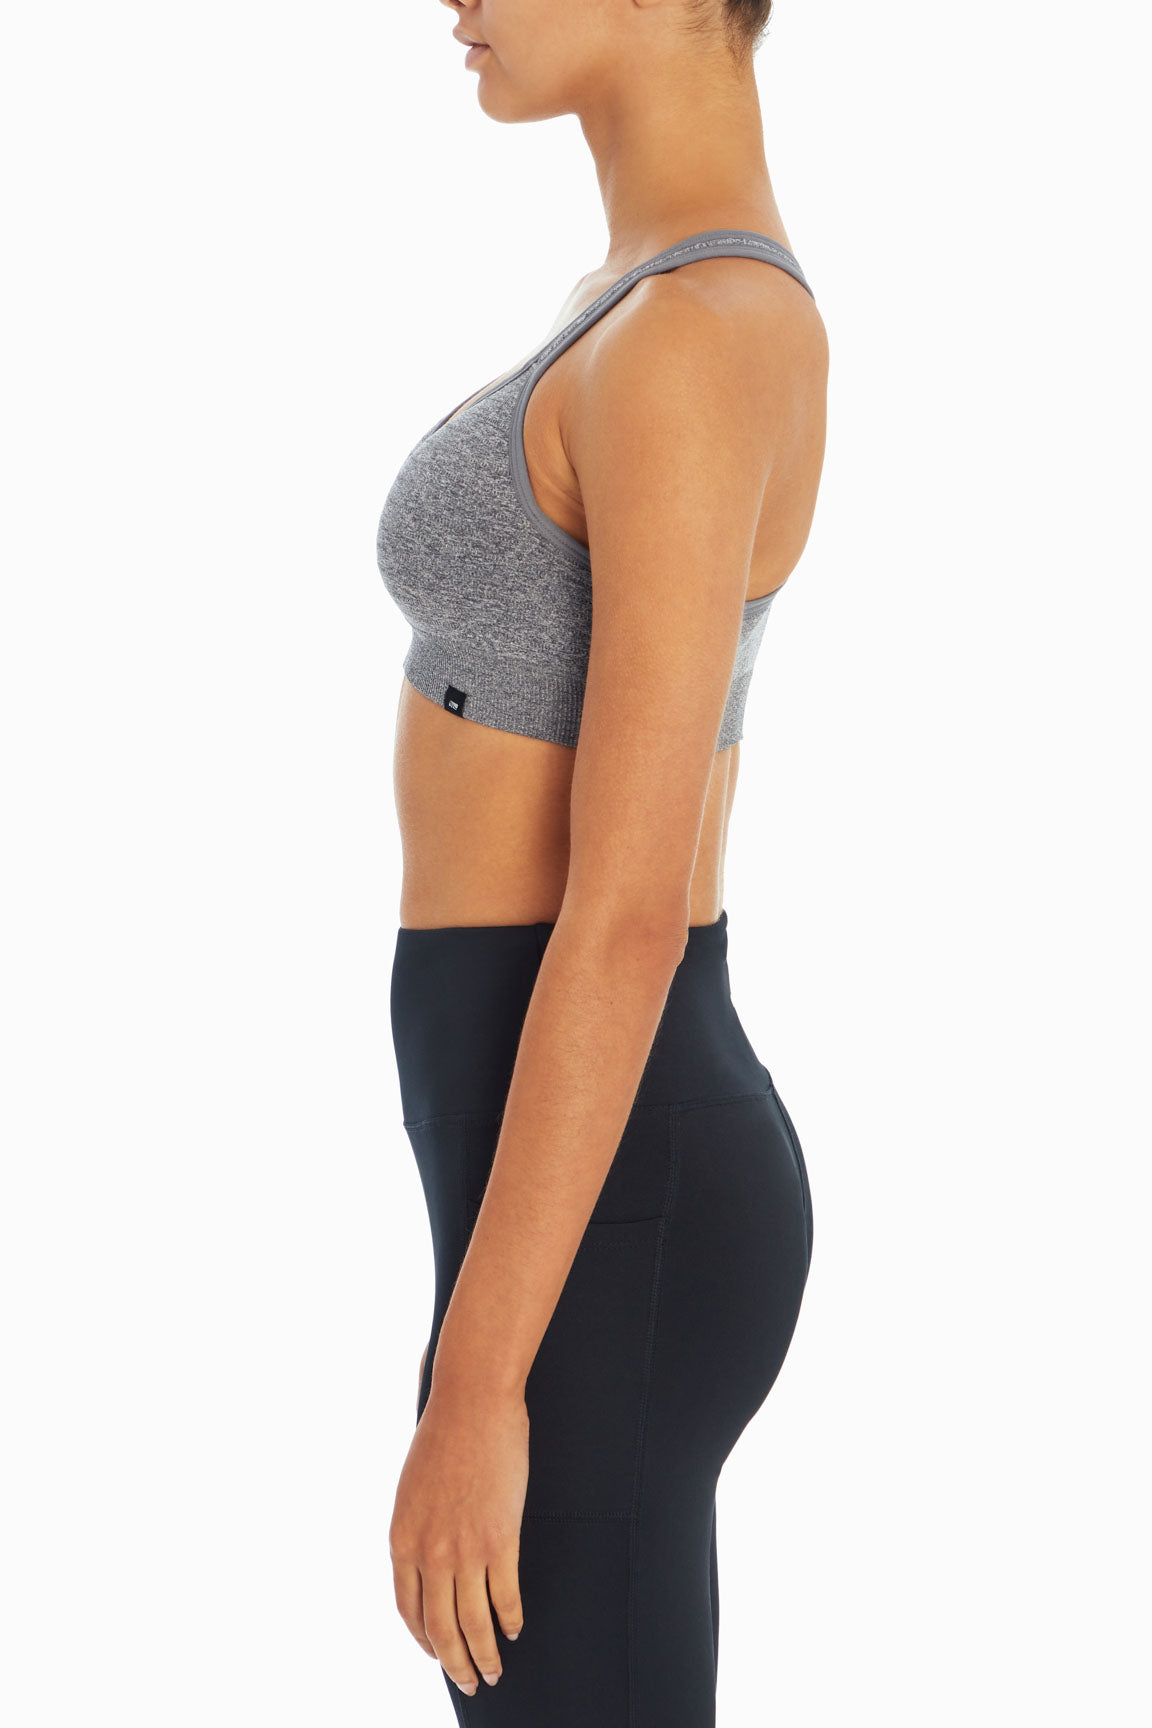 Gymshark Flex Strappy Sports Bra in Black Size XS - $26 - From May